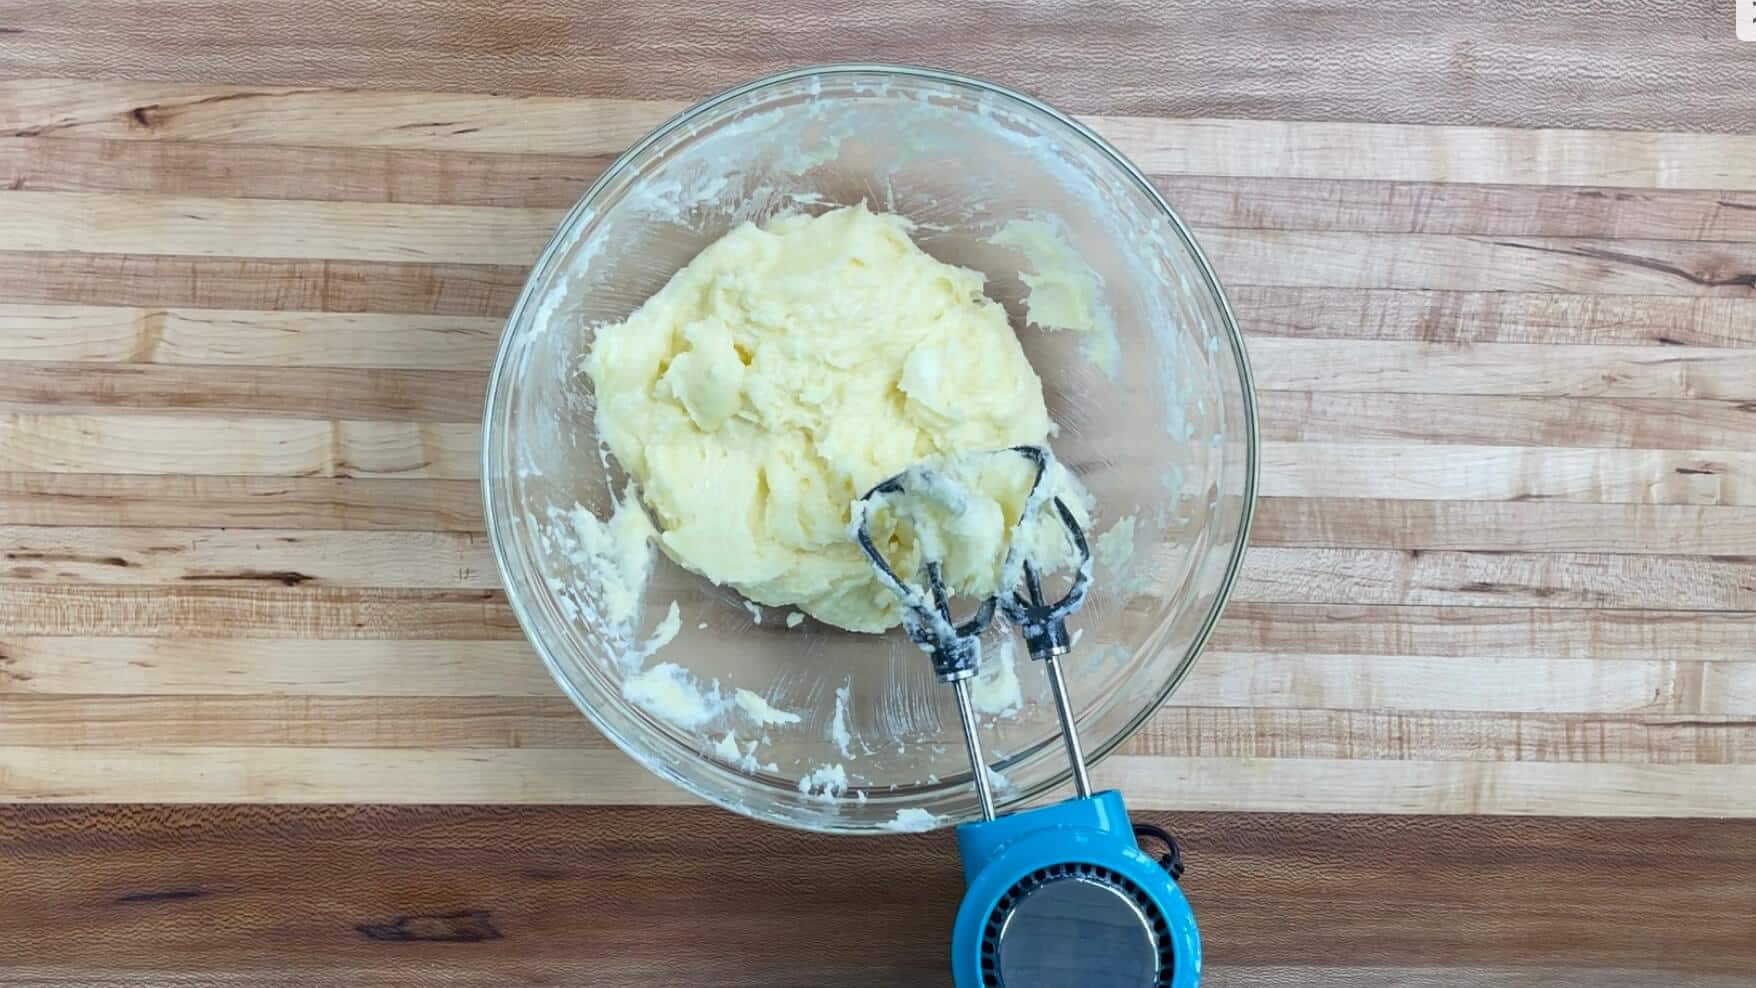 A bowl with creamed butter and other ingredients with a handheld mixer